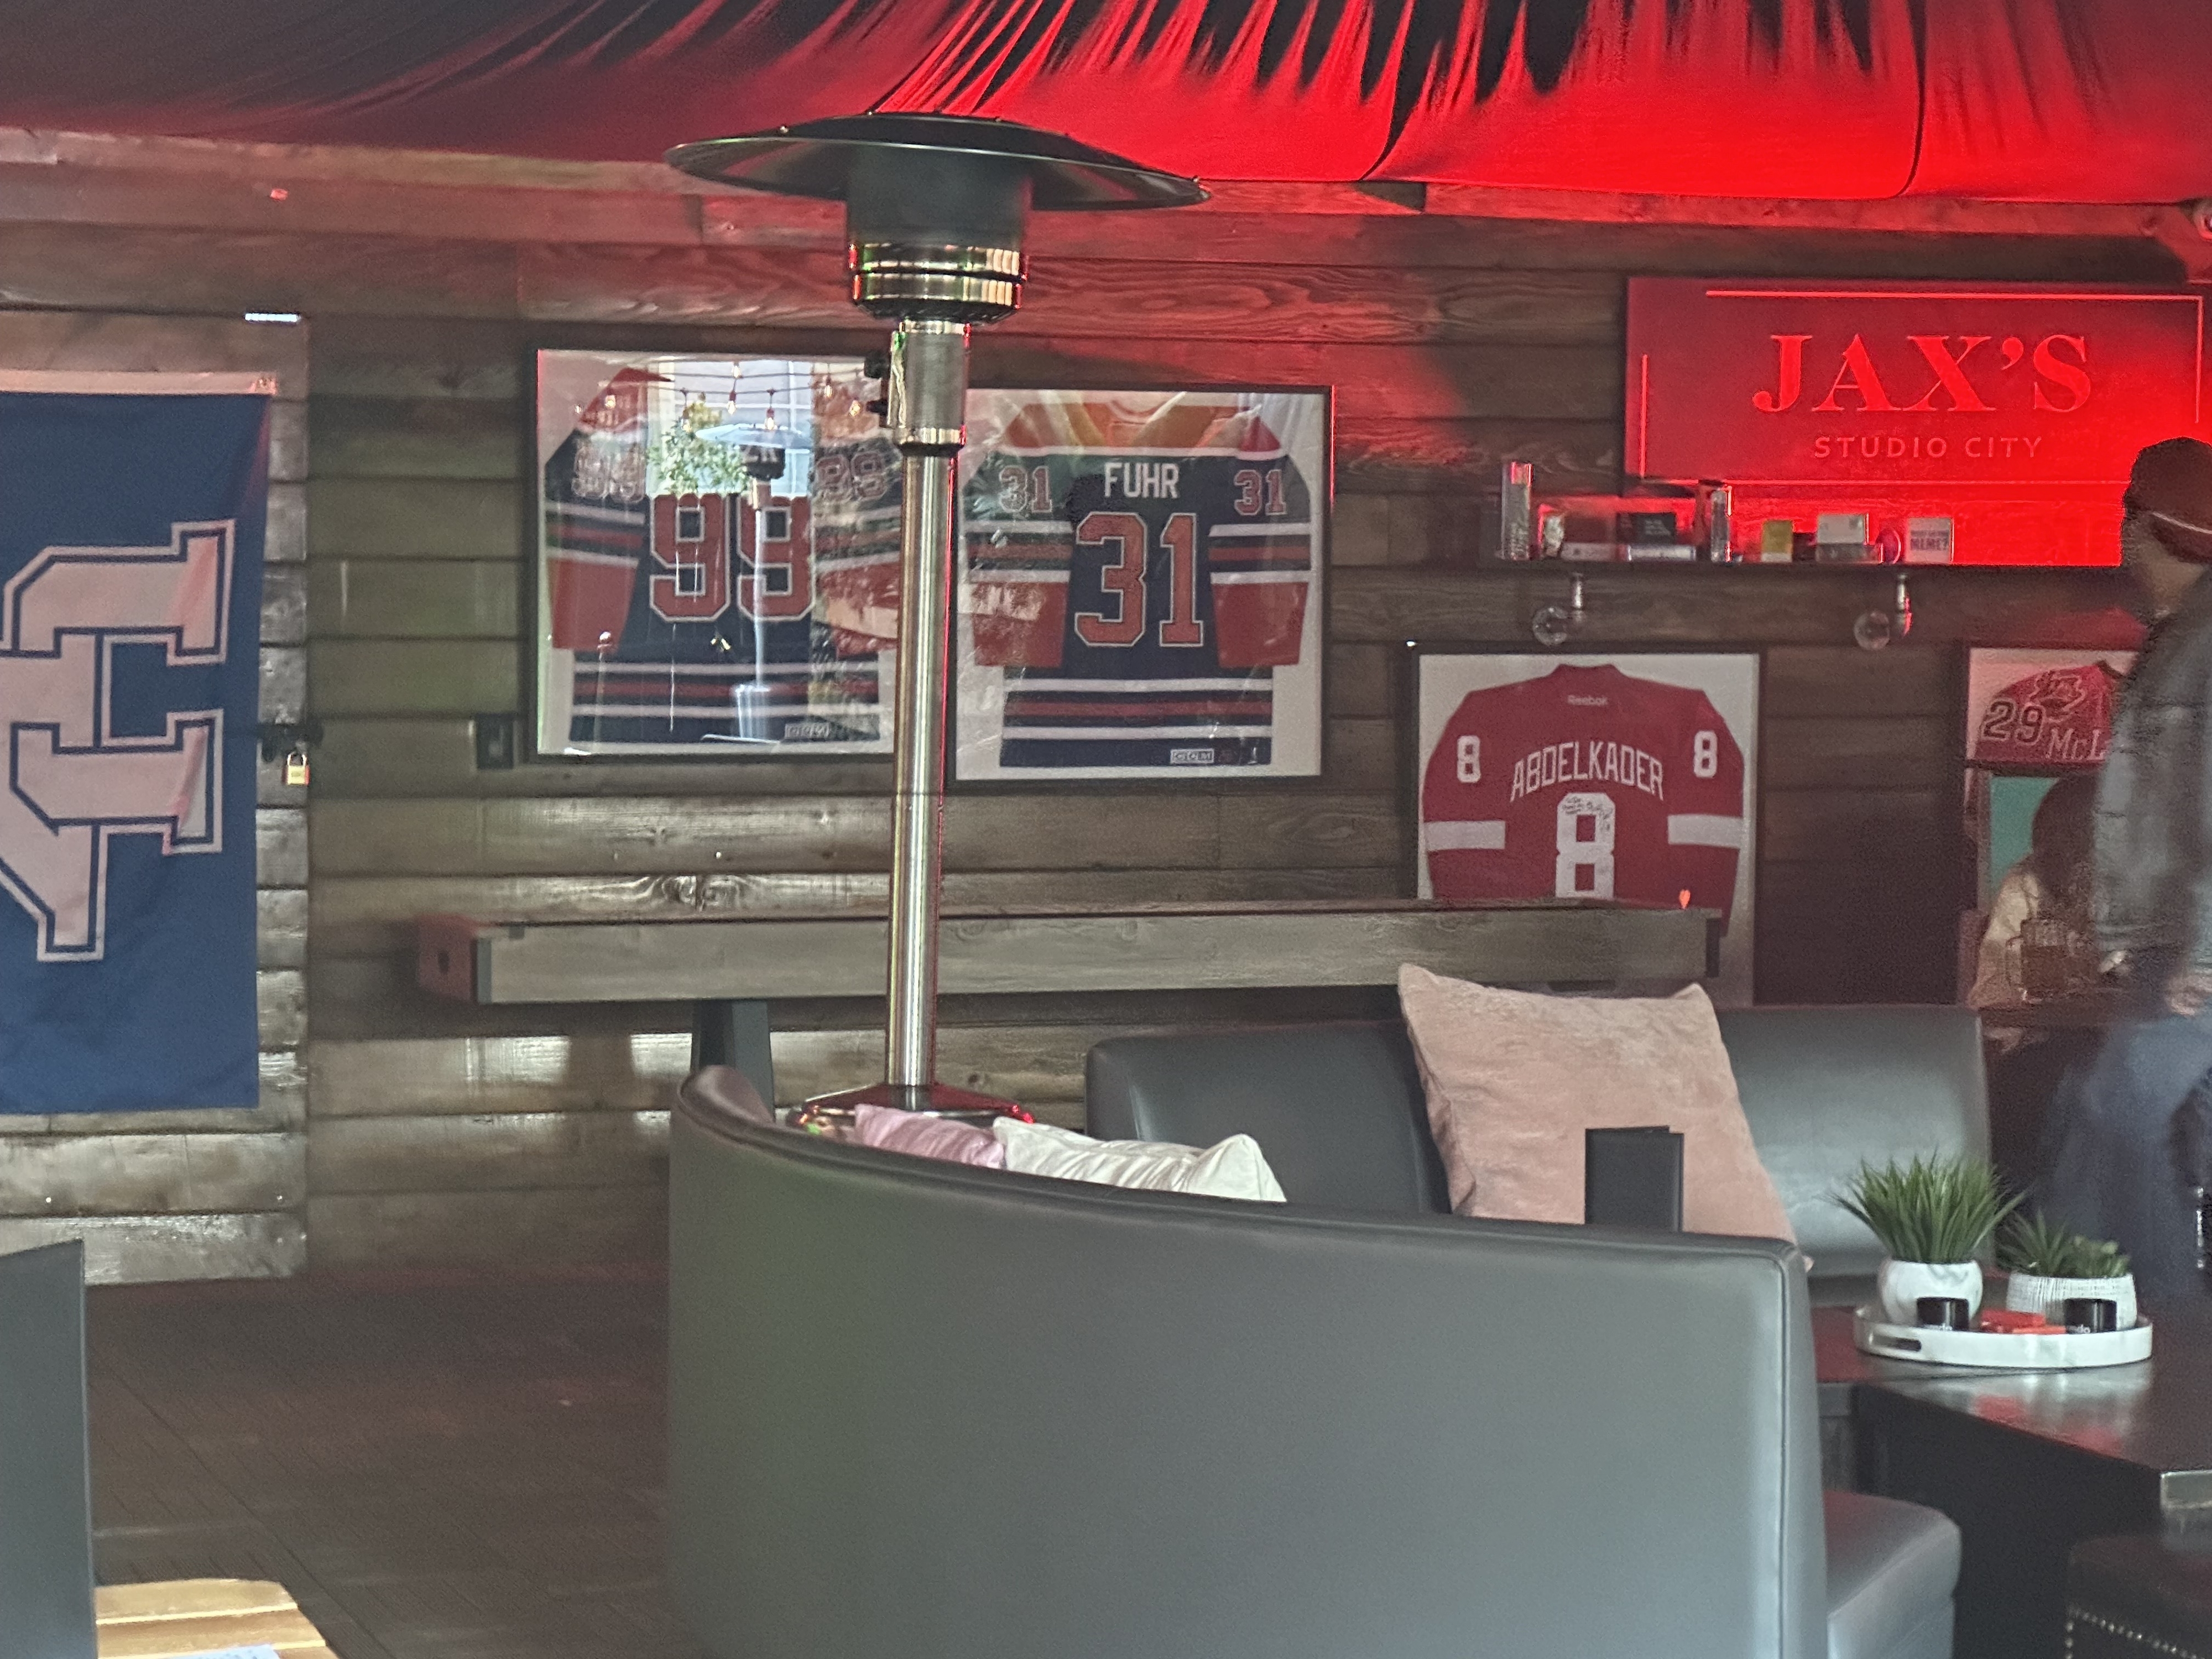 Sports jerseys are displayed on the wall of a casual dining area